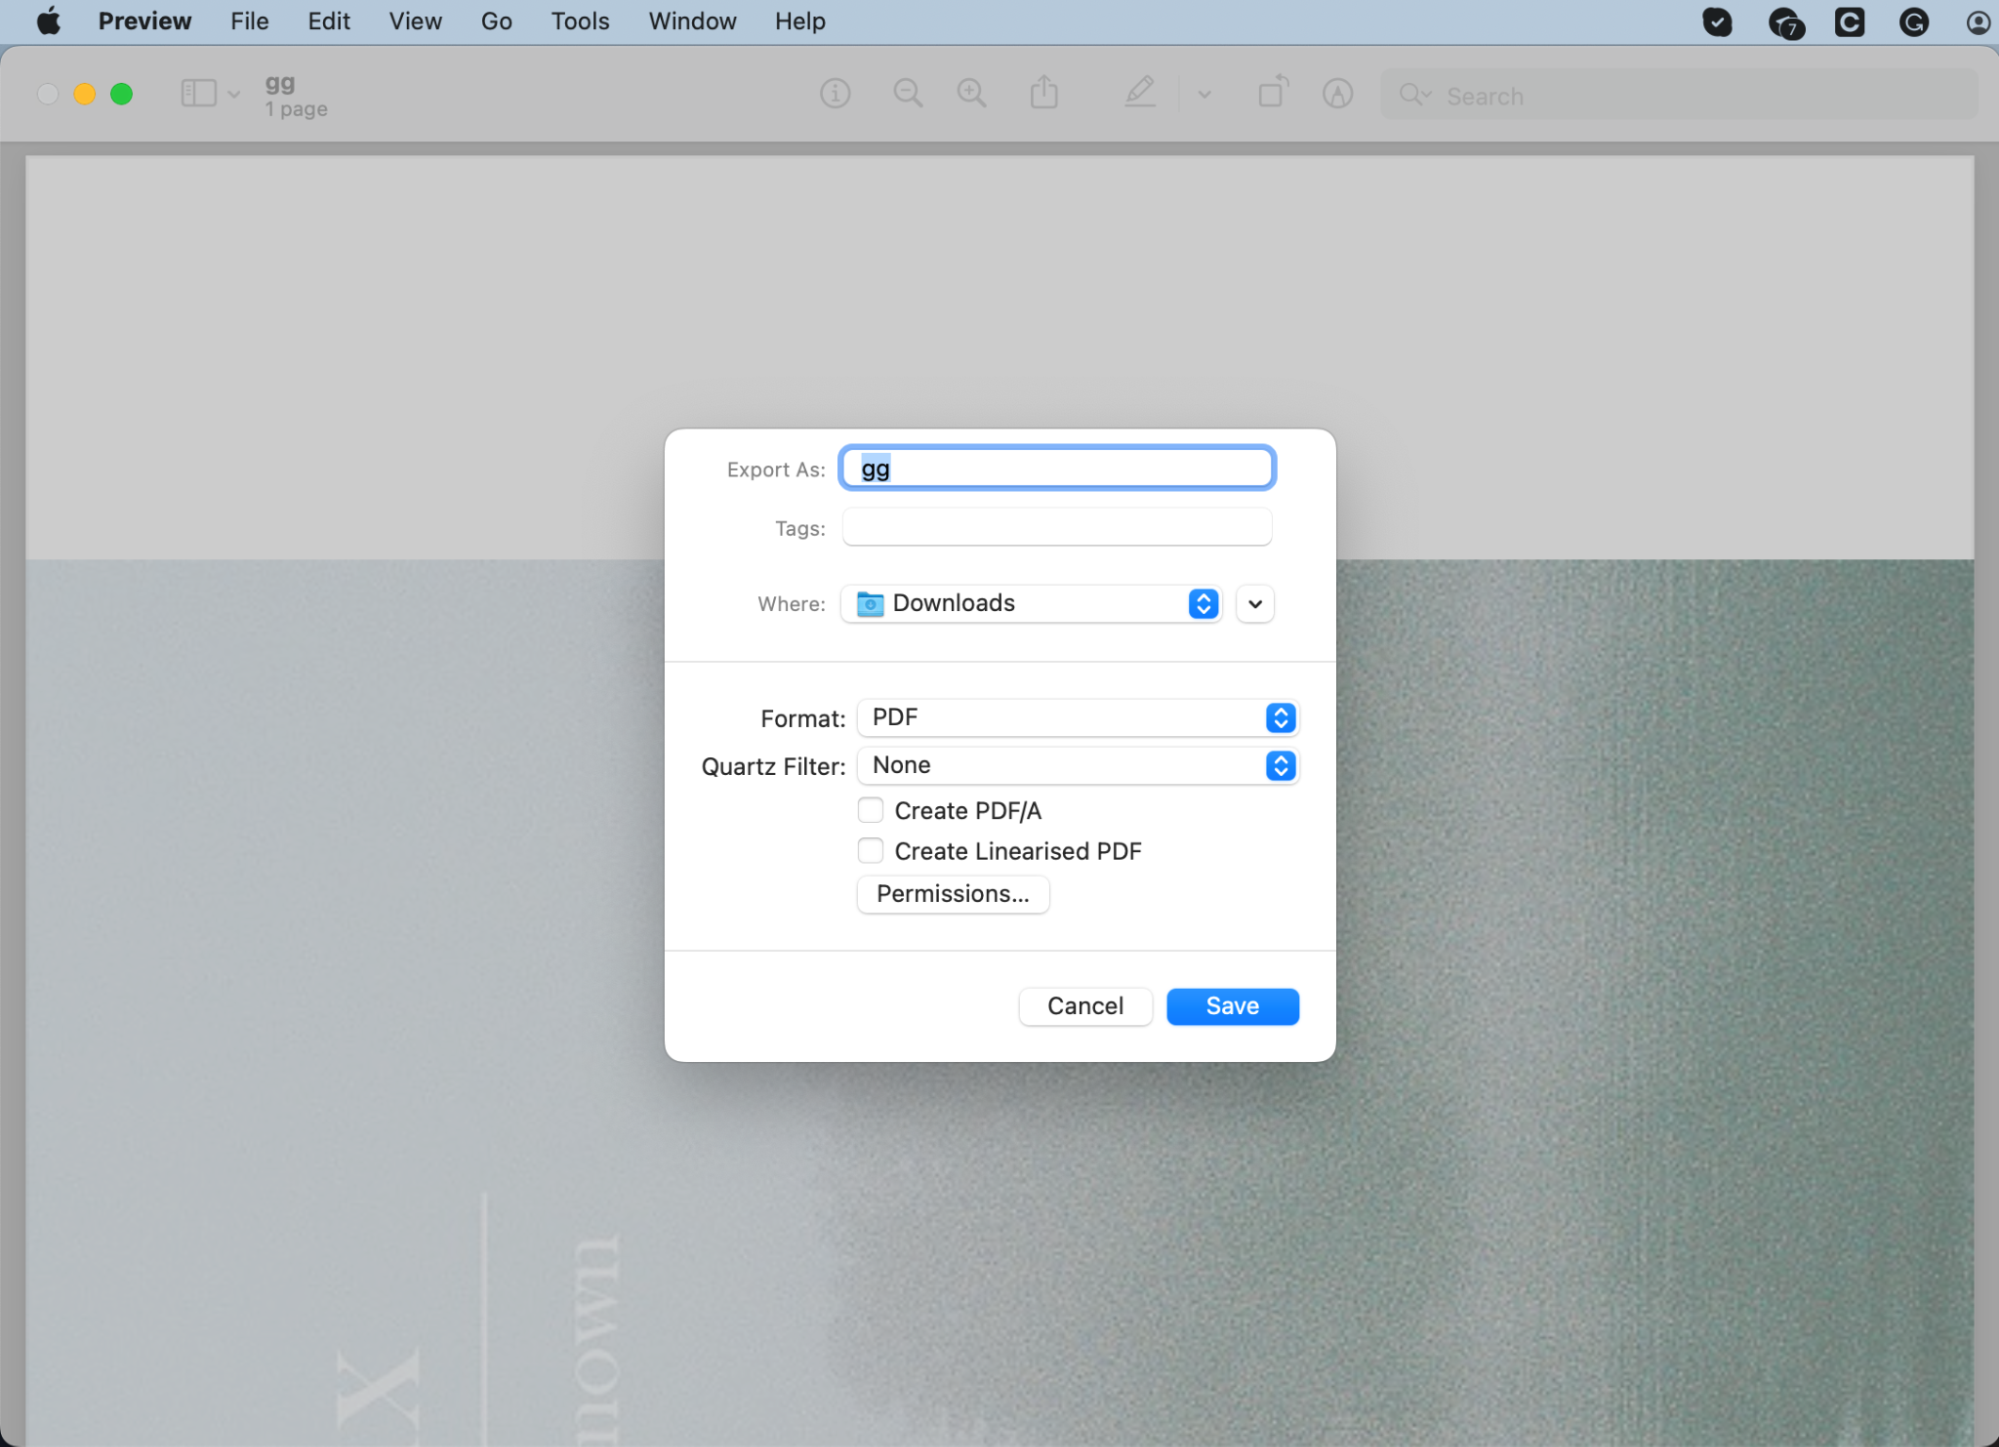 Step 3. In the menu bar, click File, then Export.